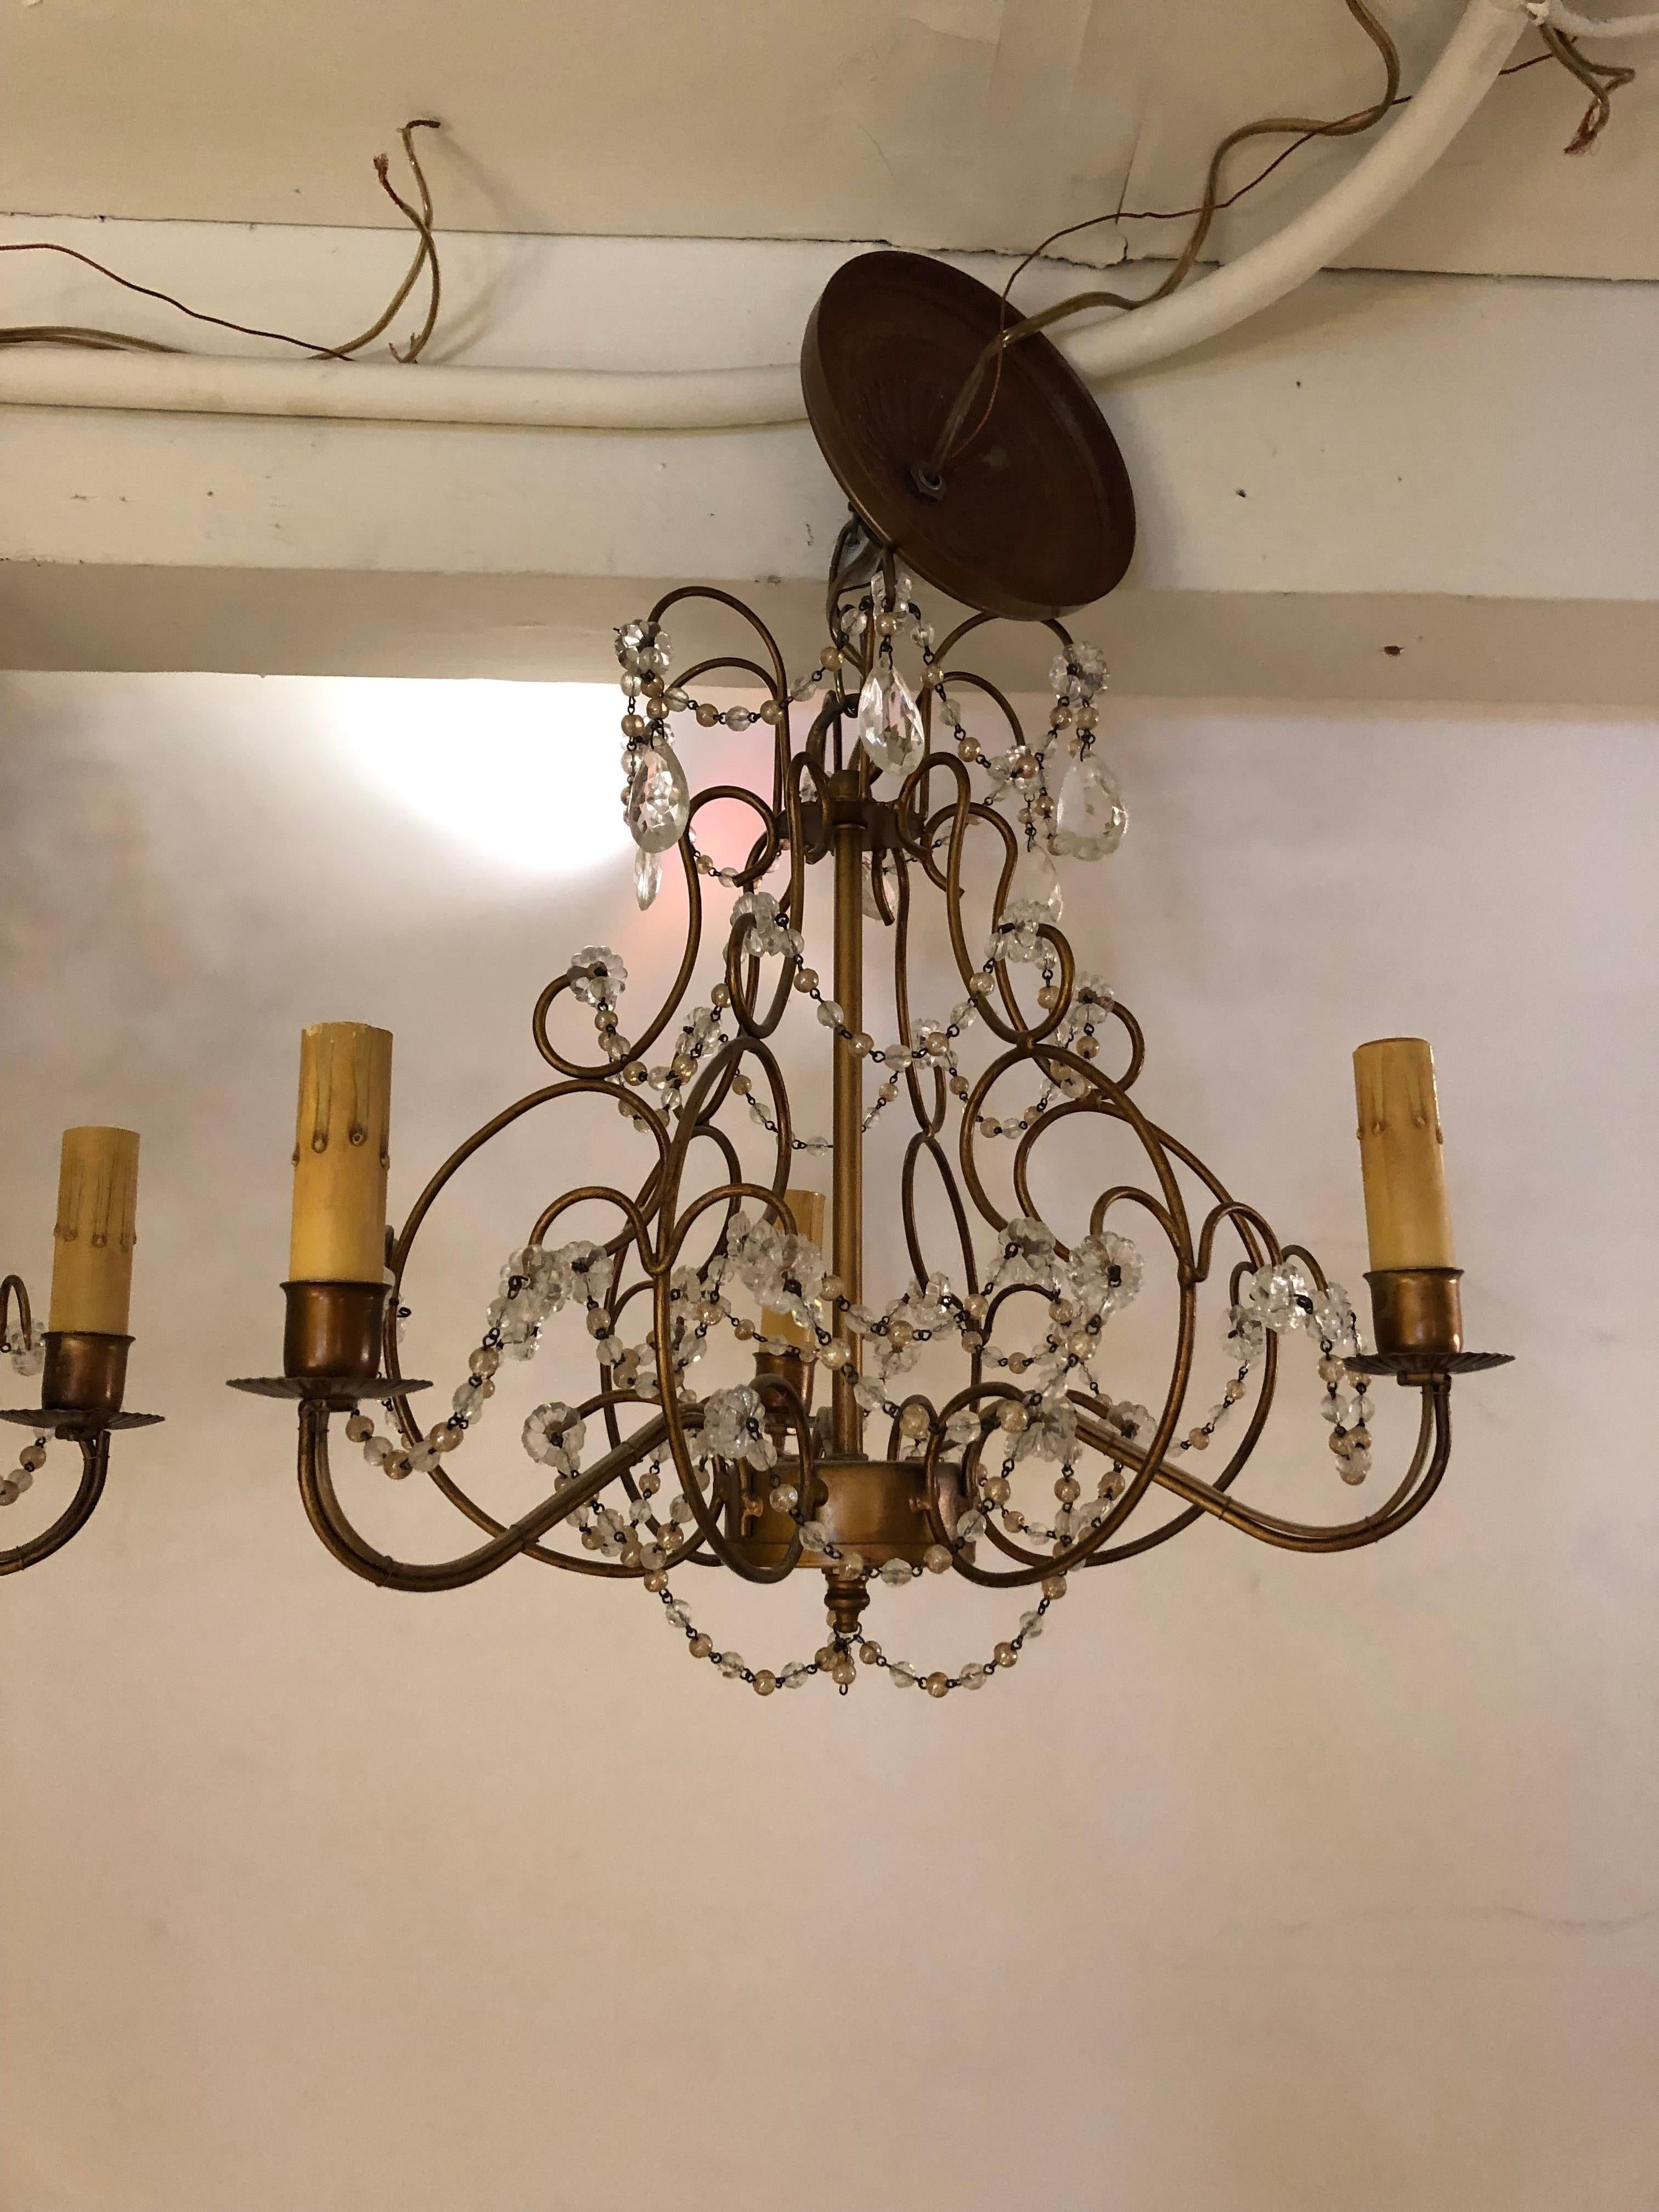 Lovely pair of gilded Italian Venetian small chandeliers having 3 arms and pretty crystal beading. Ceiling canopies included.